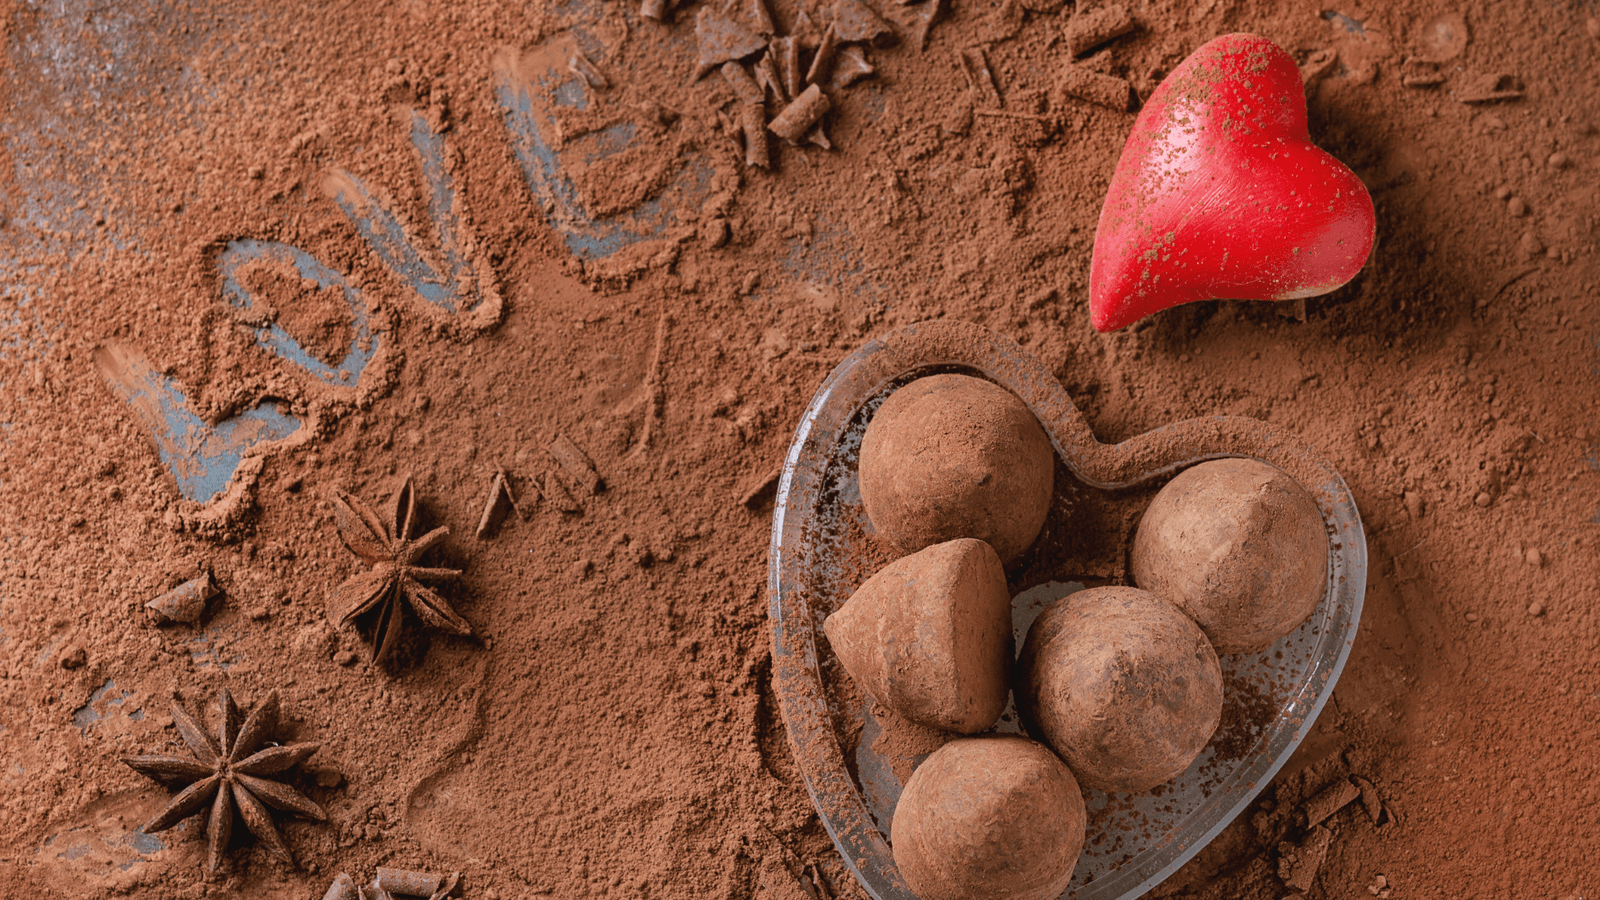 Raw cacao beans and chocolate, the heart-healthy superfood.